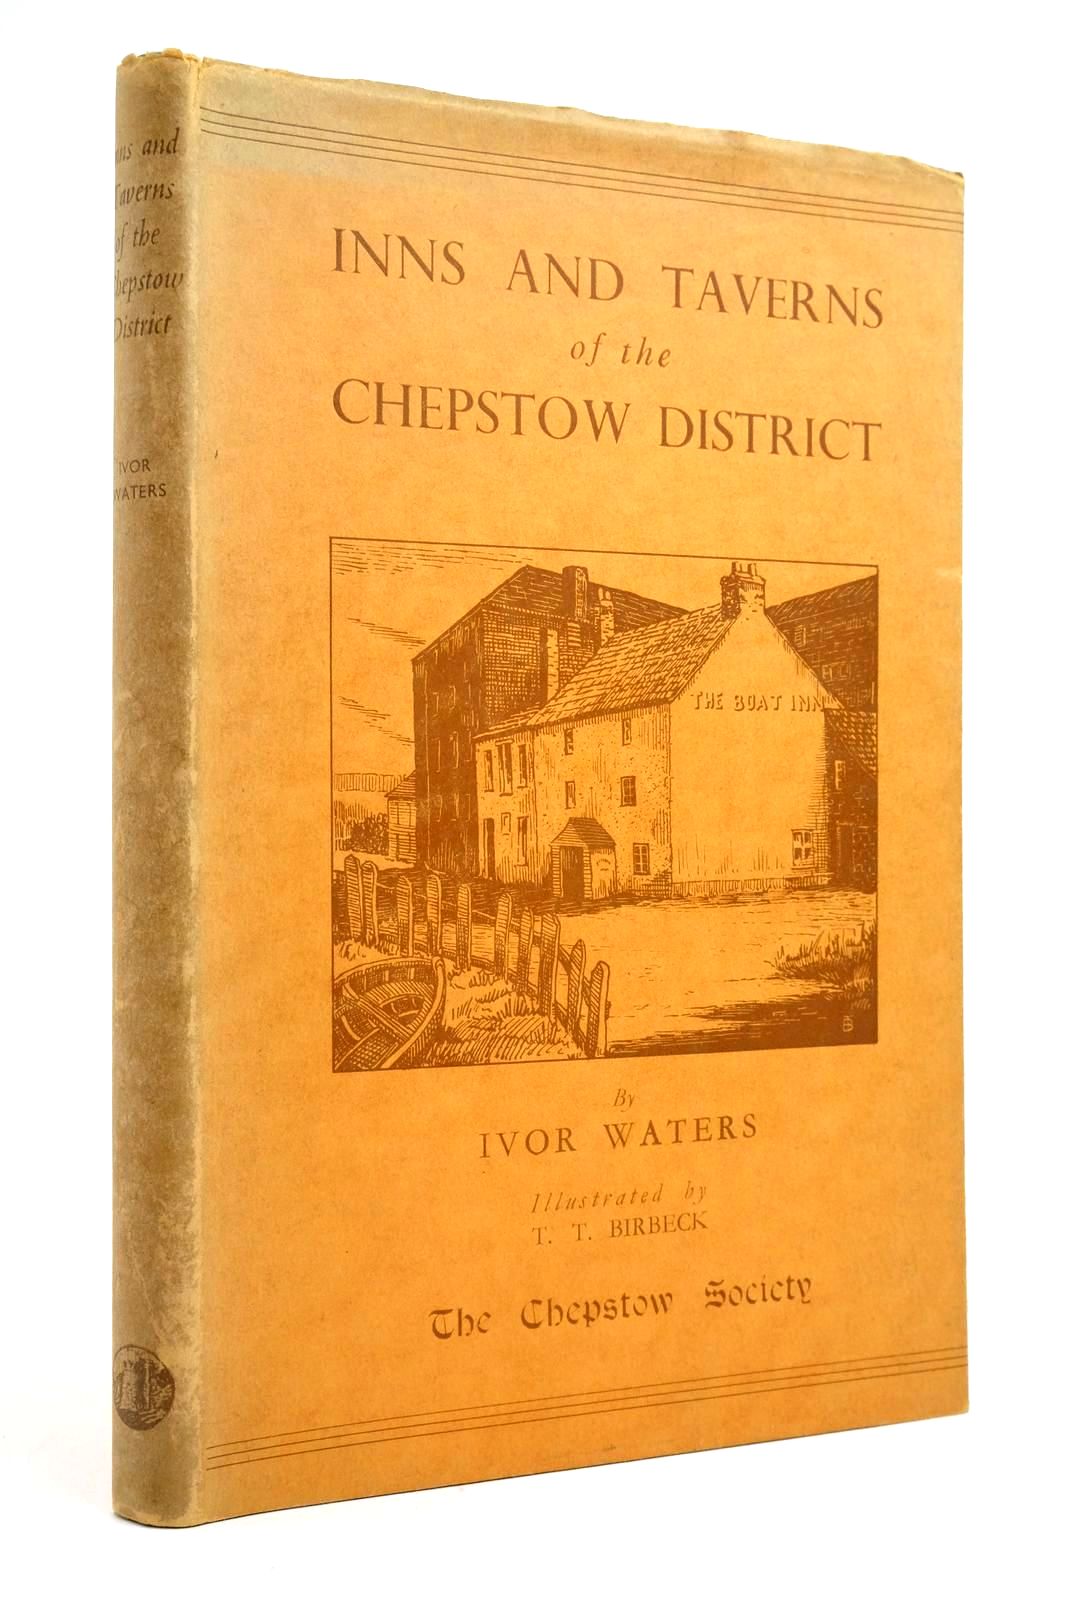 Photo of INNS AND TAVERNS OF THE CHEPSTOW DISTRICT- Stock Number: 2135503